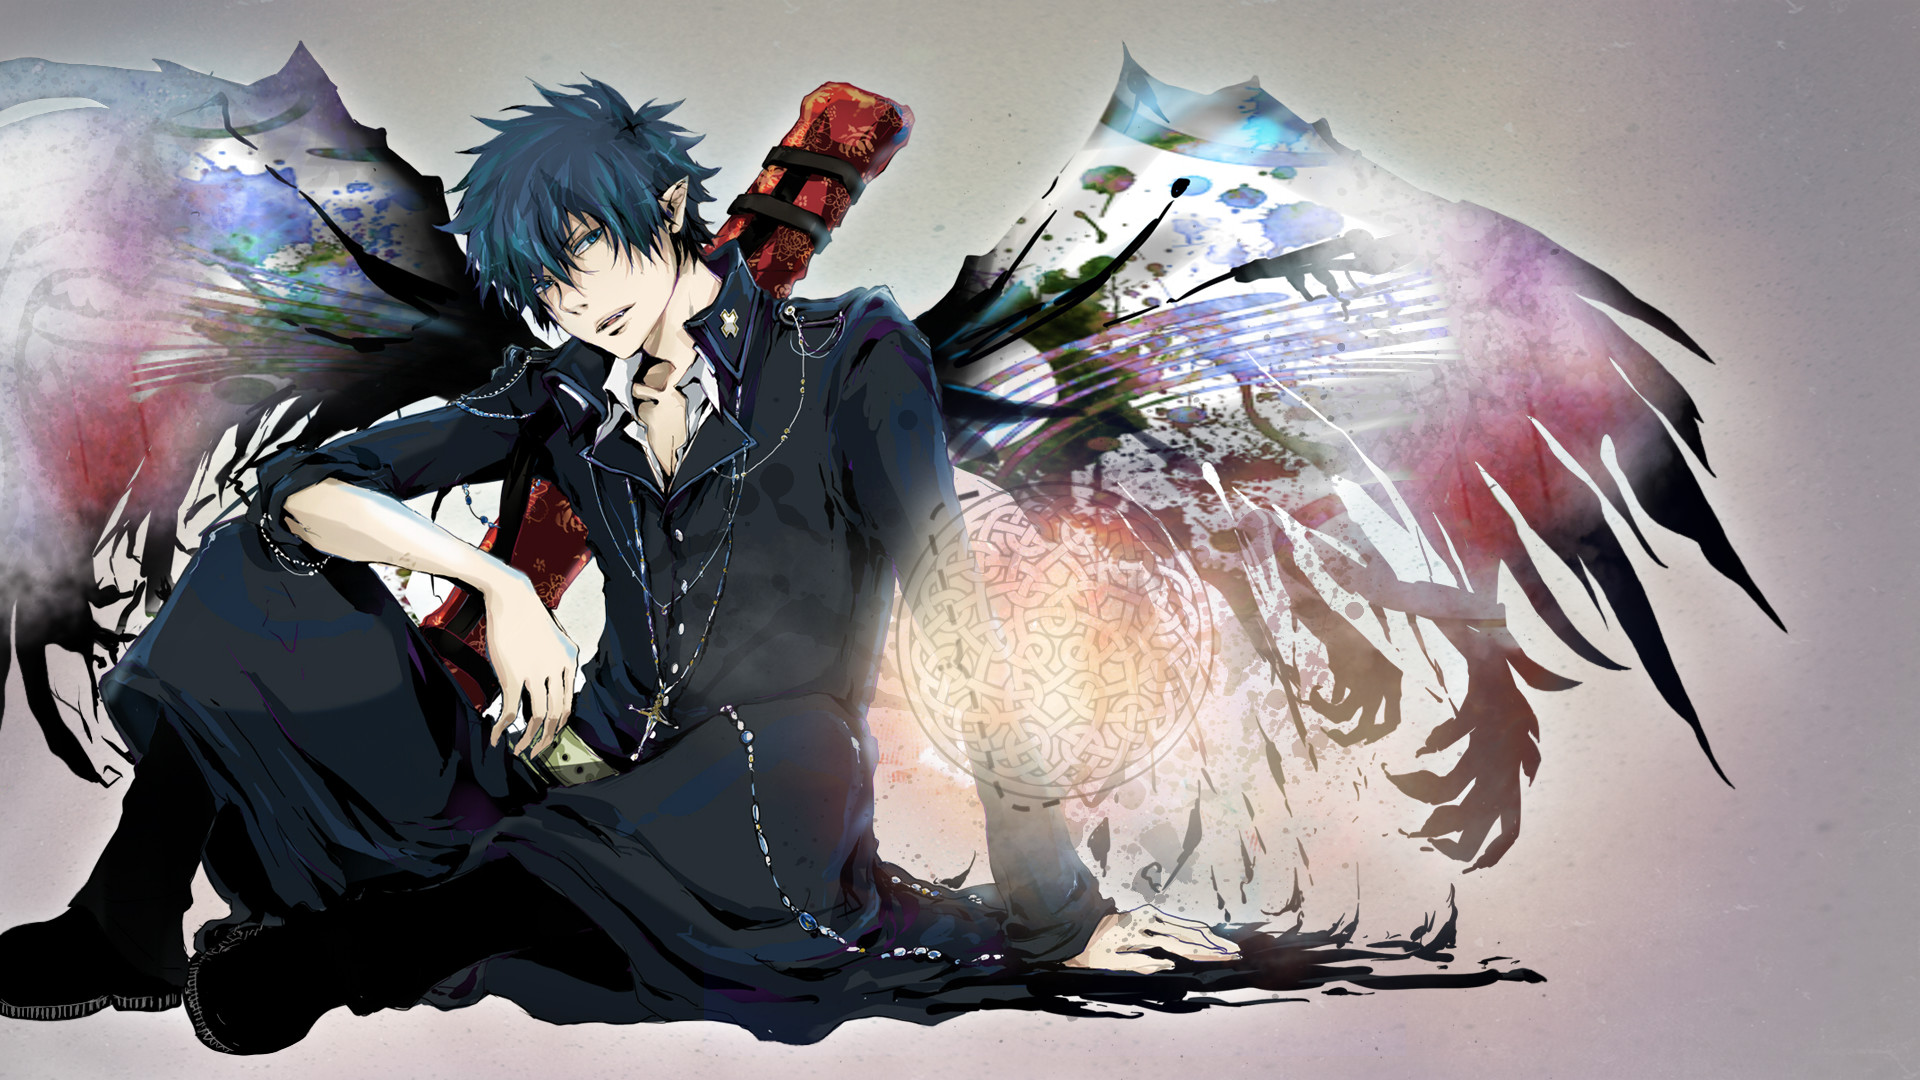 1920x1080 Blue Exorcist Rin By Yumeodori 3025835 With Resolutions 19201080 